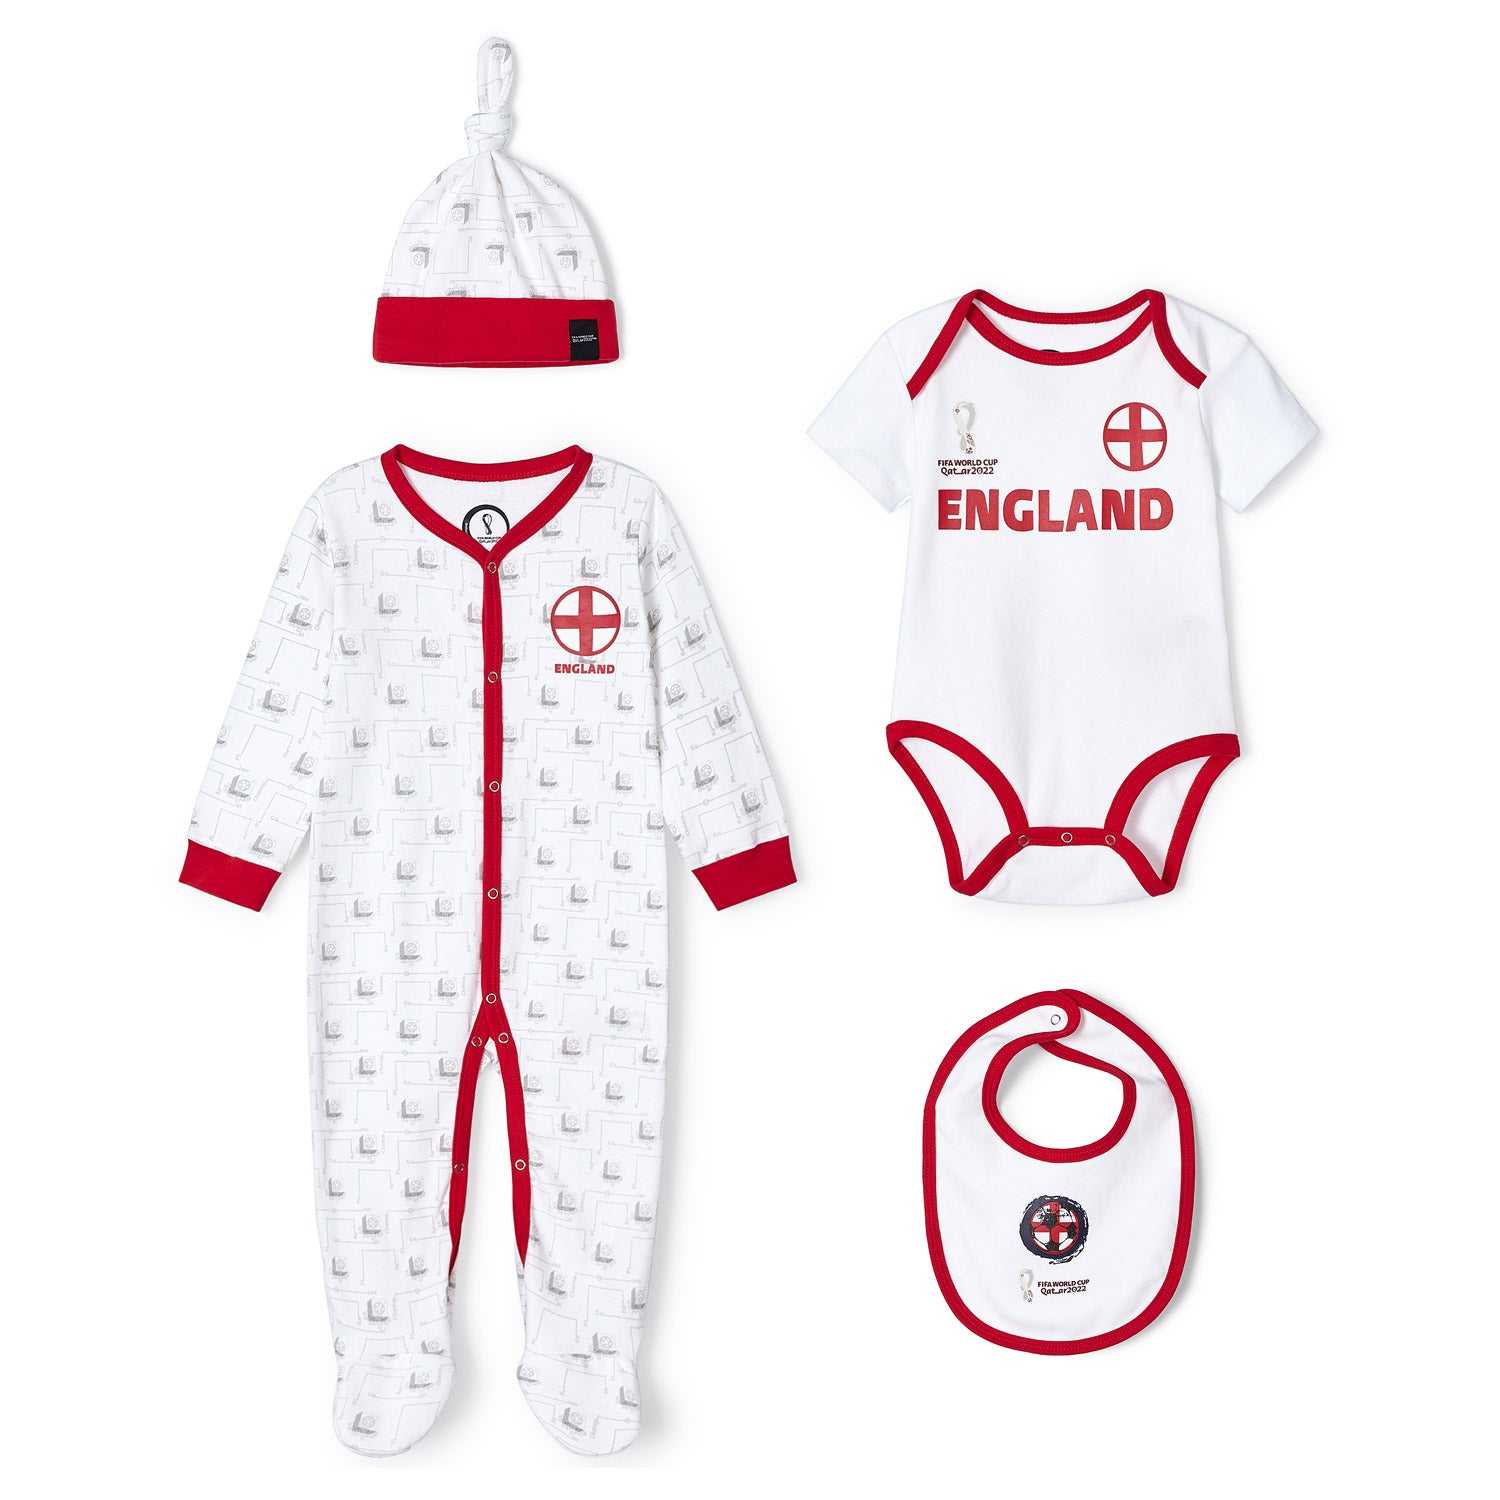 2022 World Cup England White Romper - Infant/Toddler